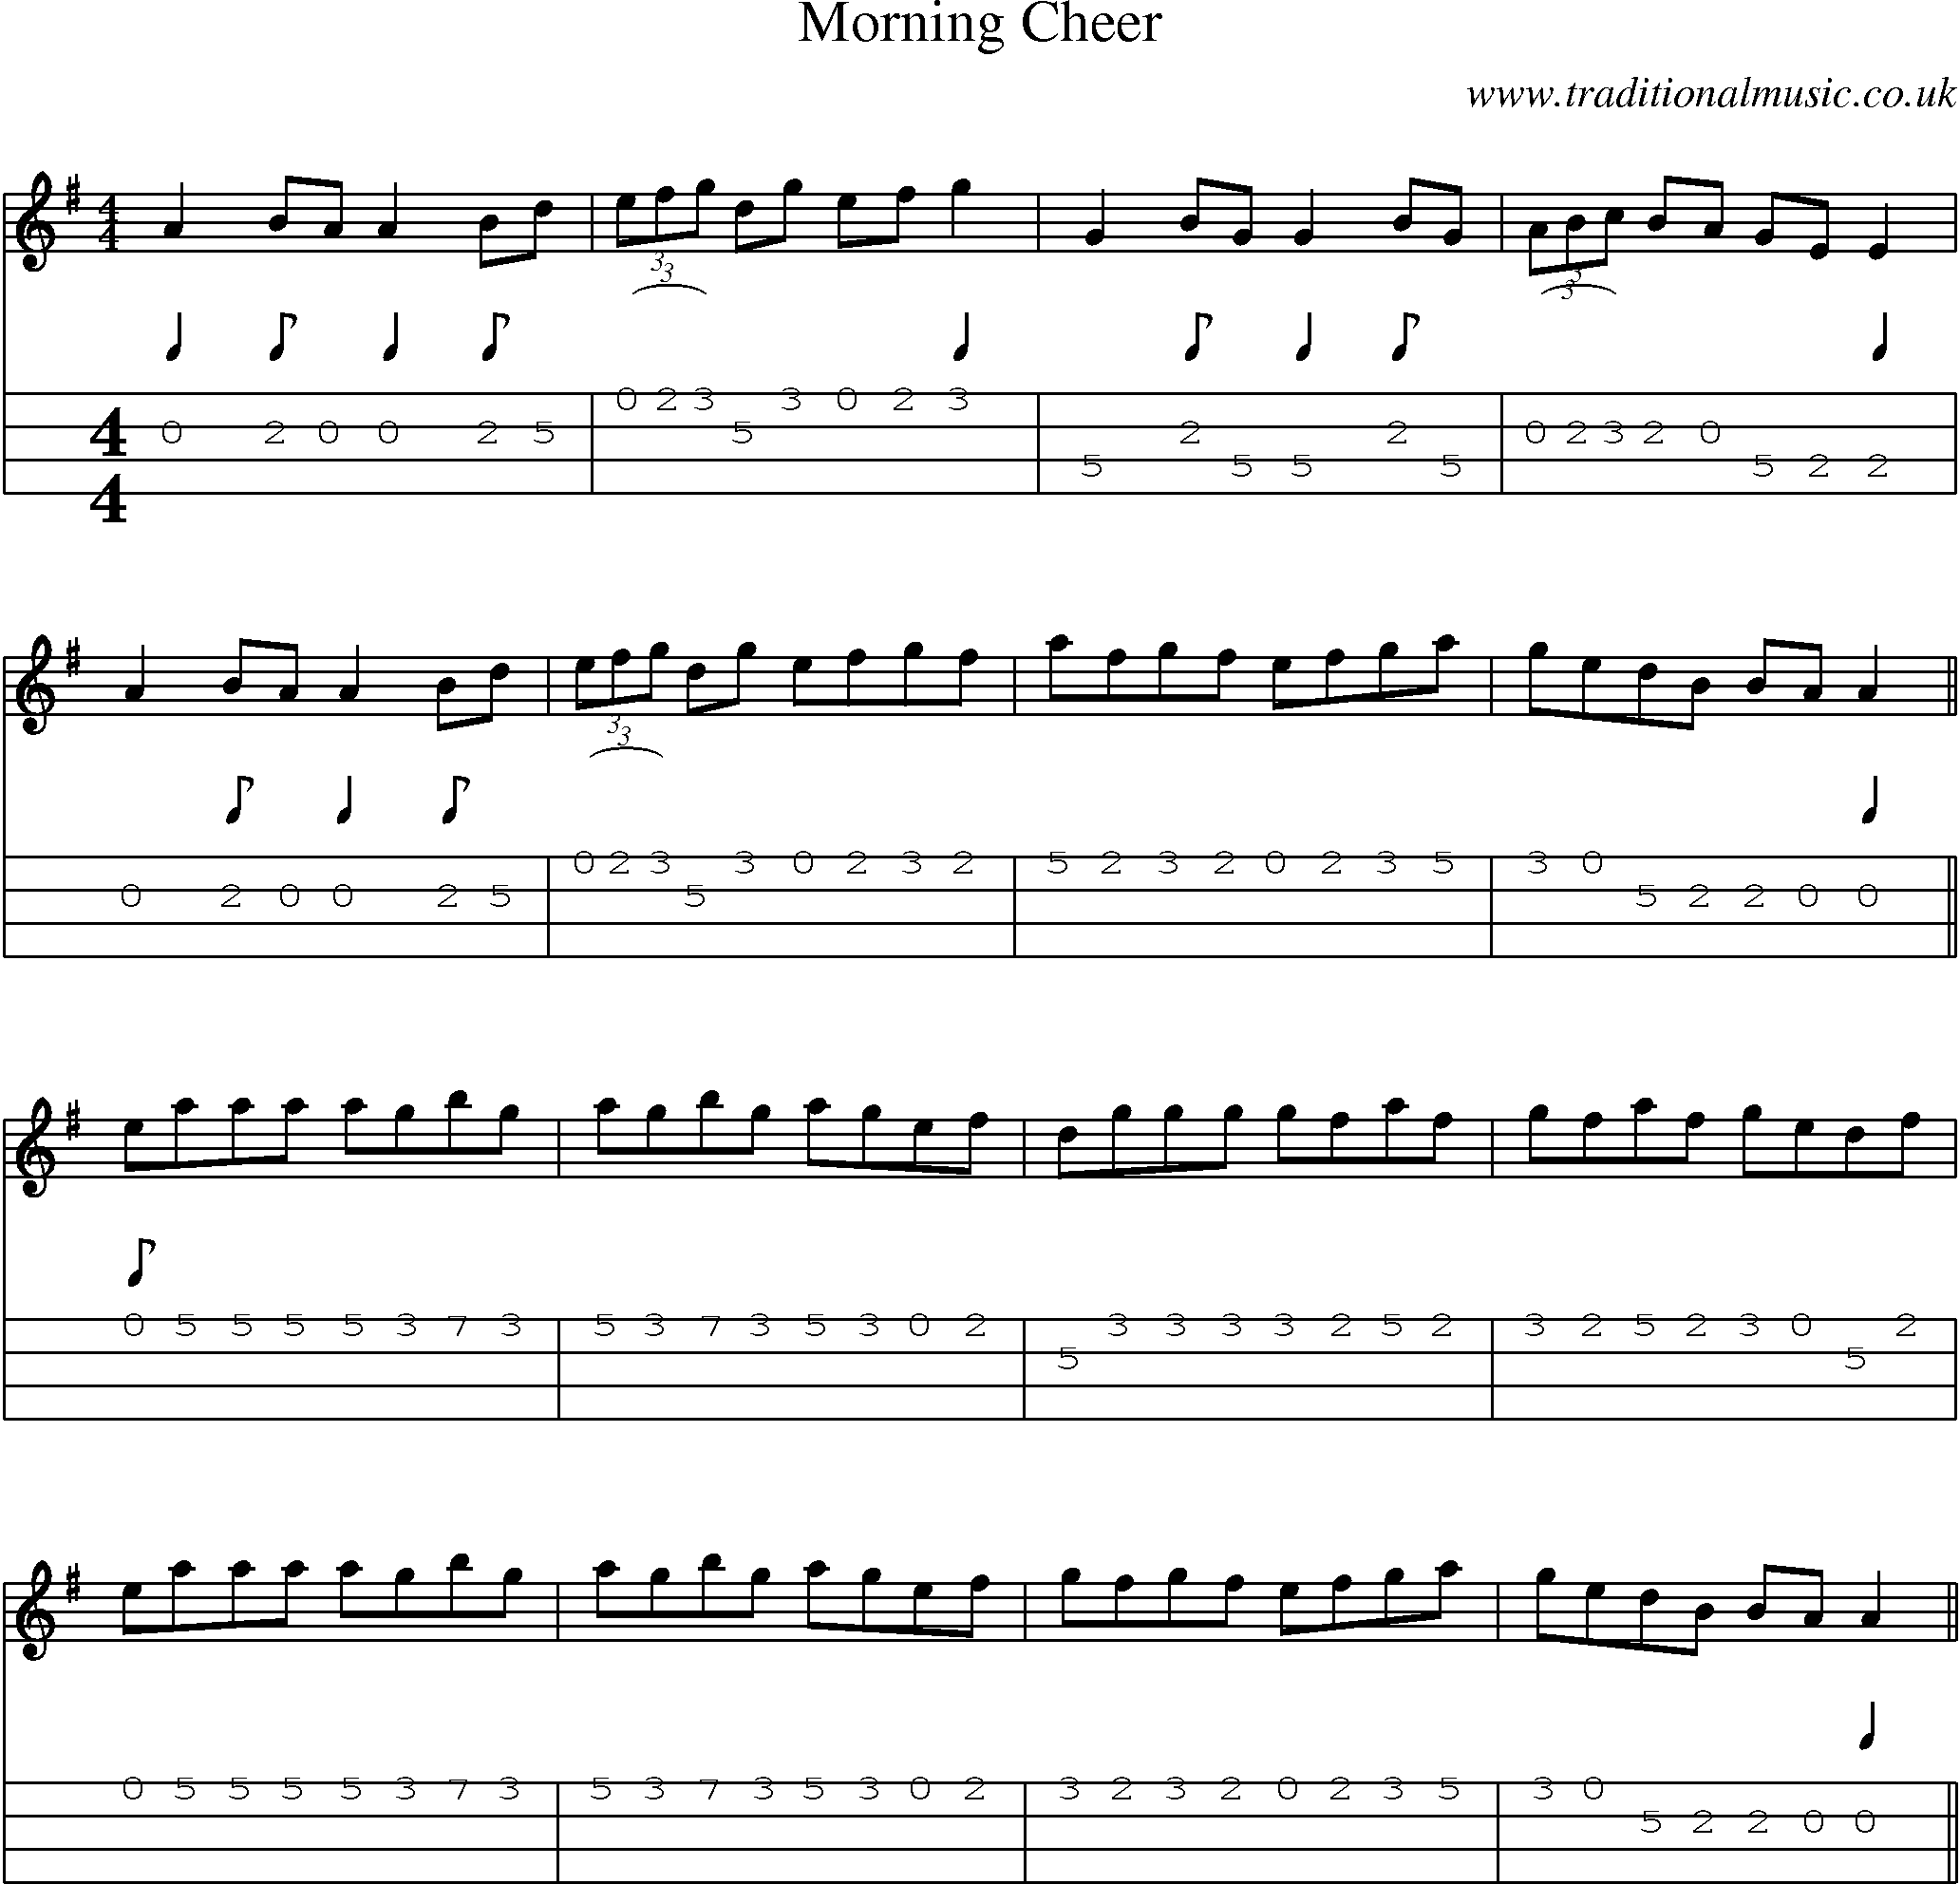 Music Score and Mandolin Tabs for Morning Cheer